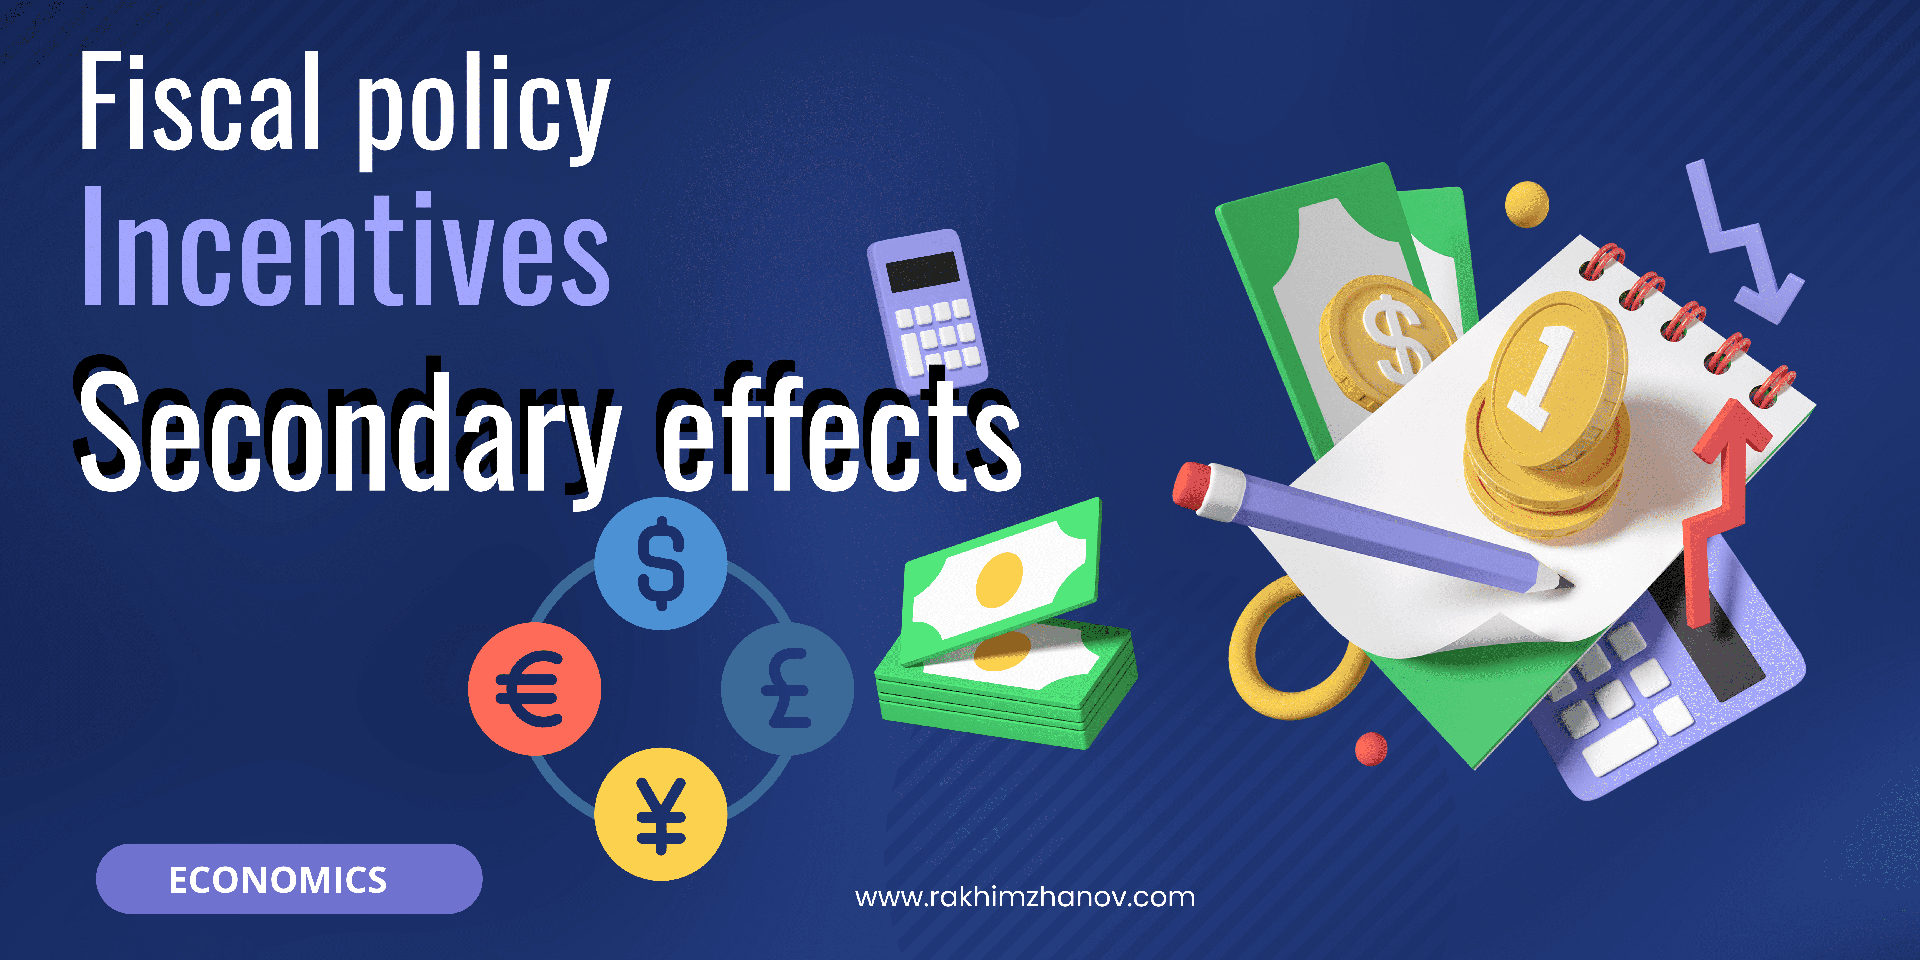 Fiscal policy, incentives and secondary effects